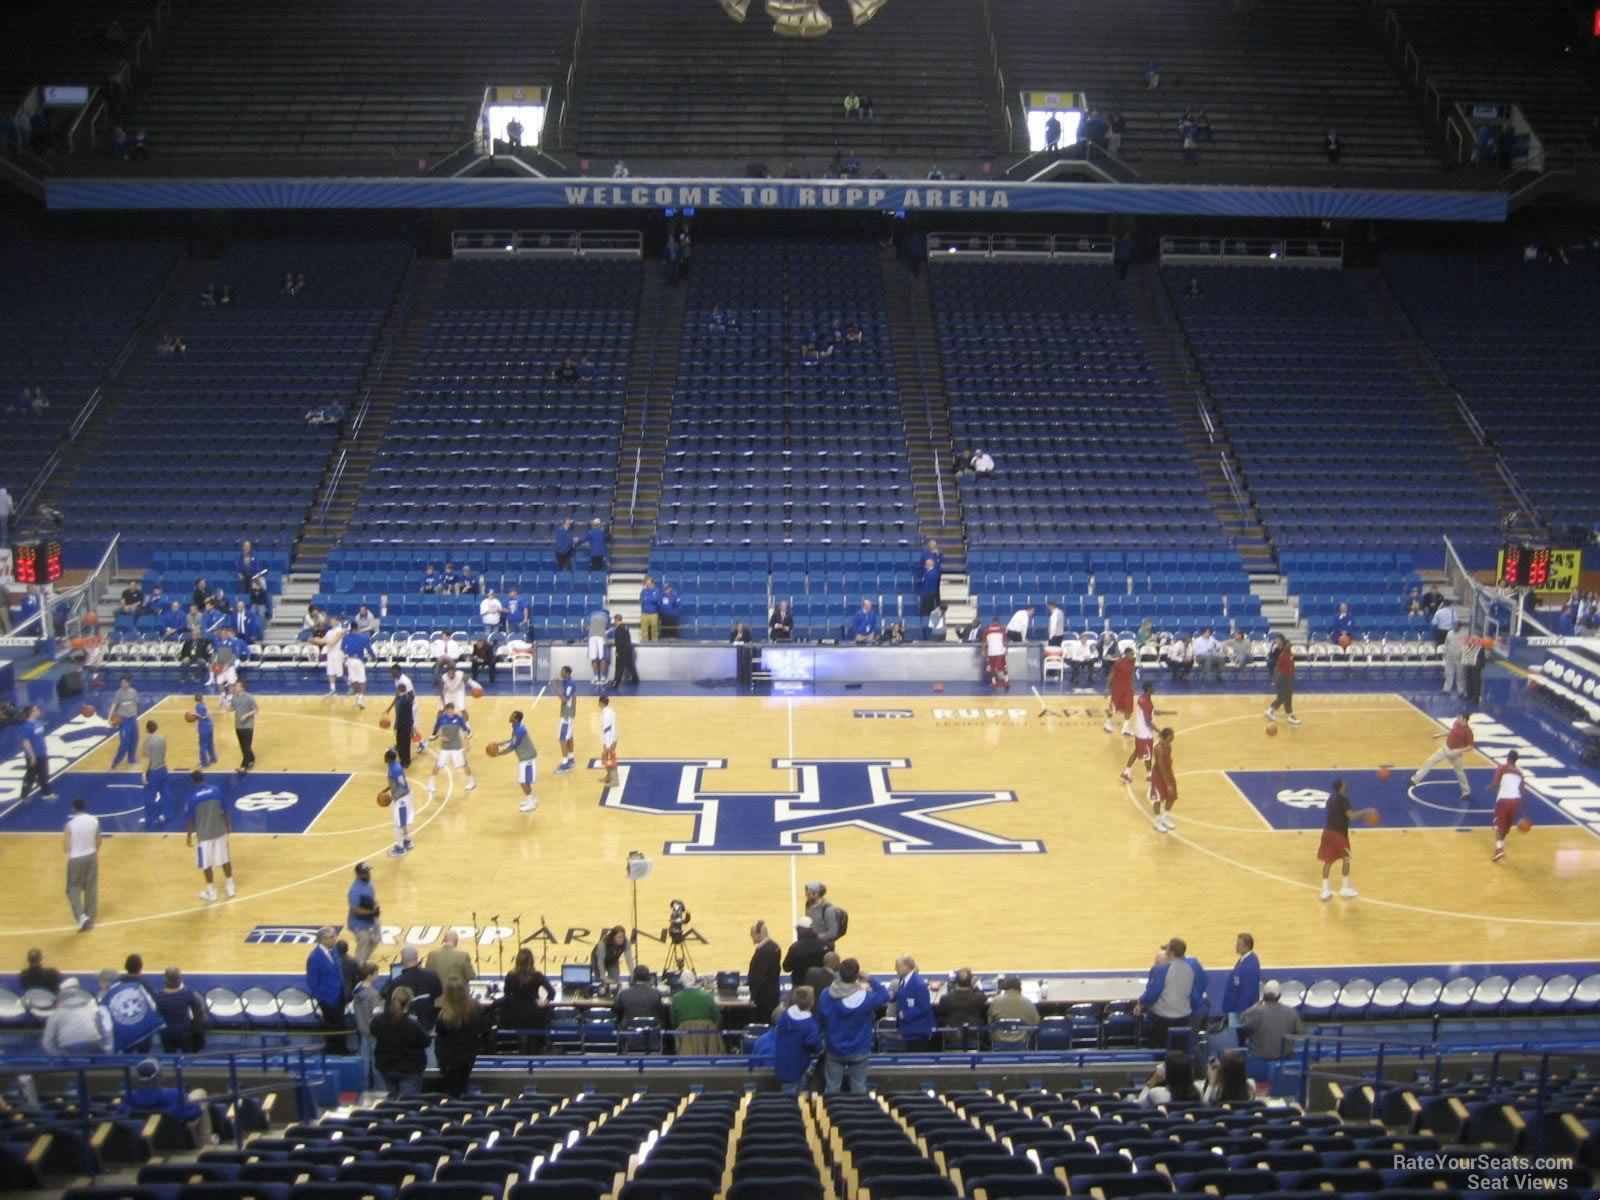 Section 14 at Rupp Arena - RateYourSeats.com